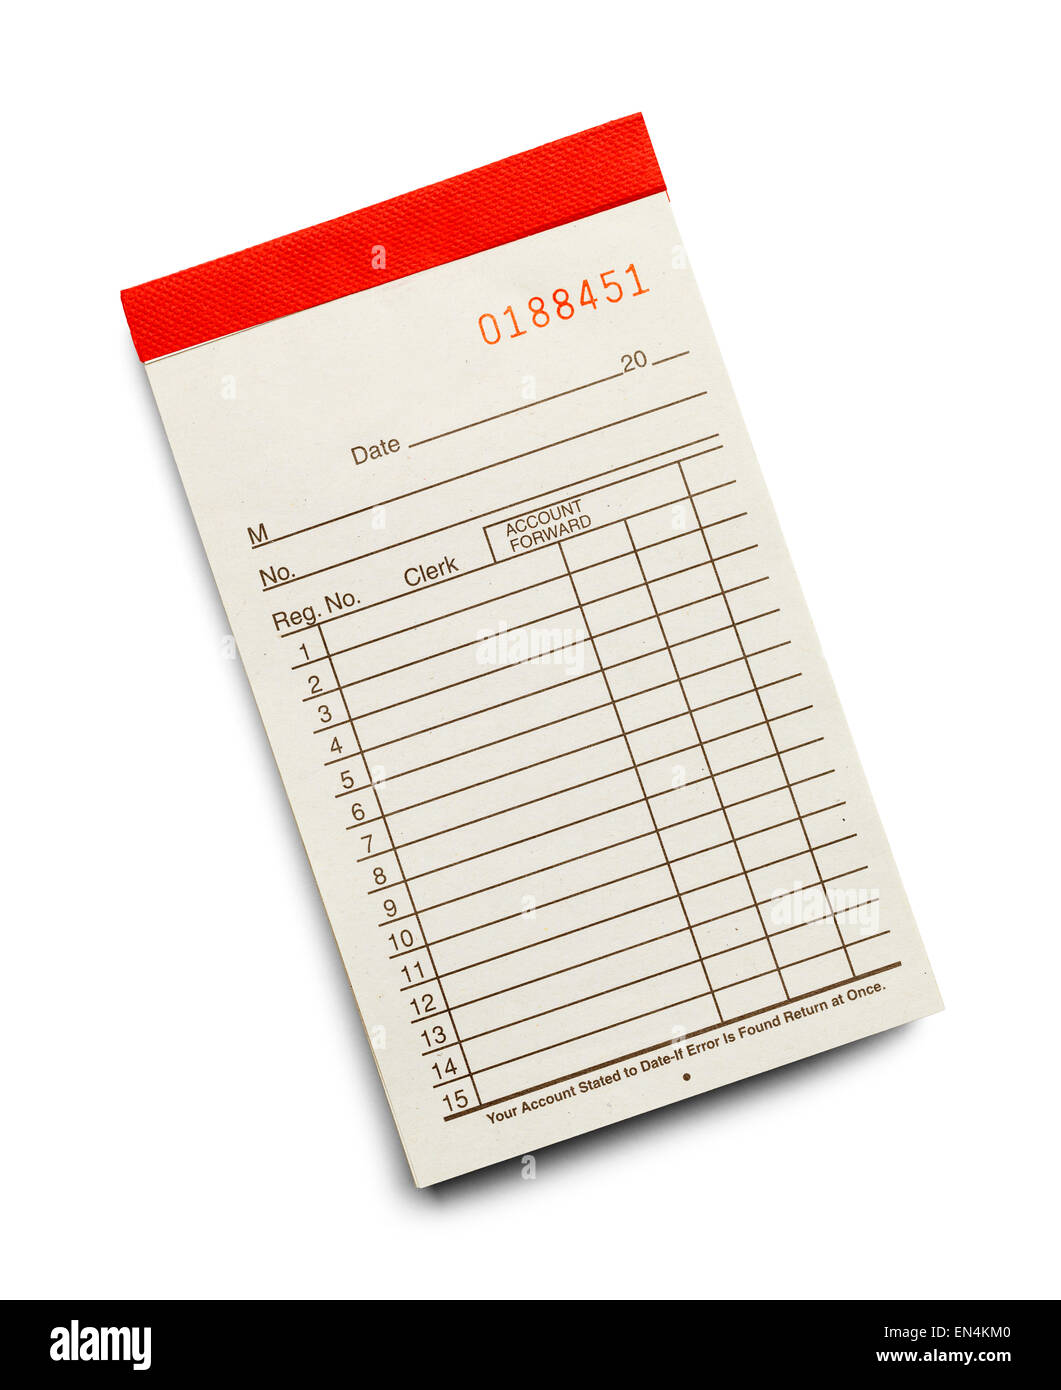 Receipt Pad with Copy Space from the Top View Isolated on a White Background. Stock Photo